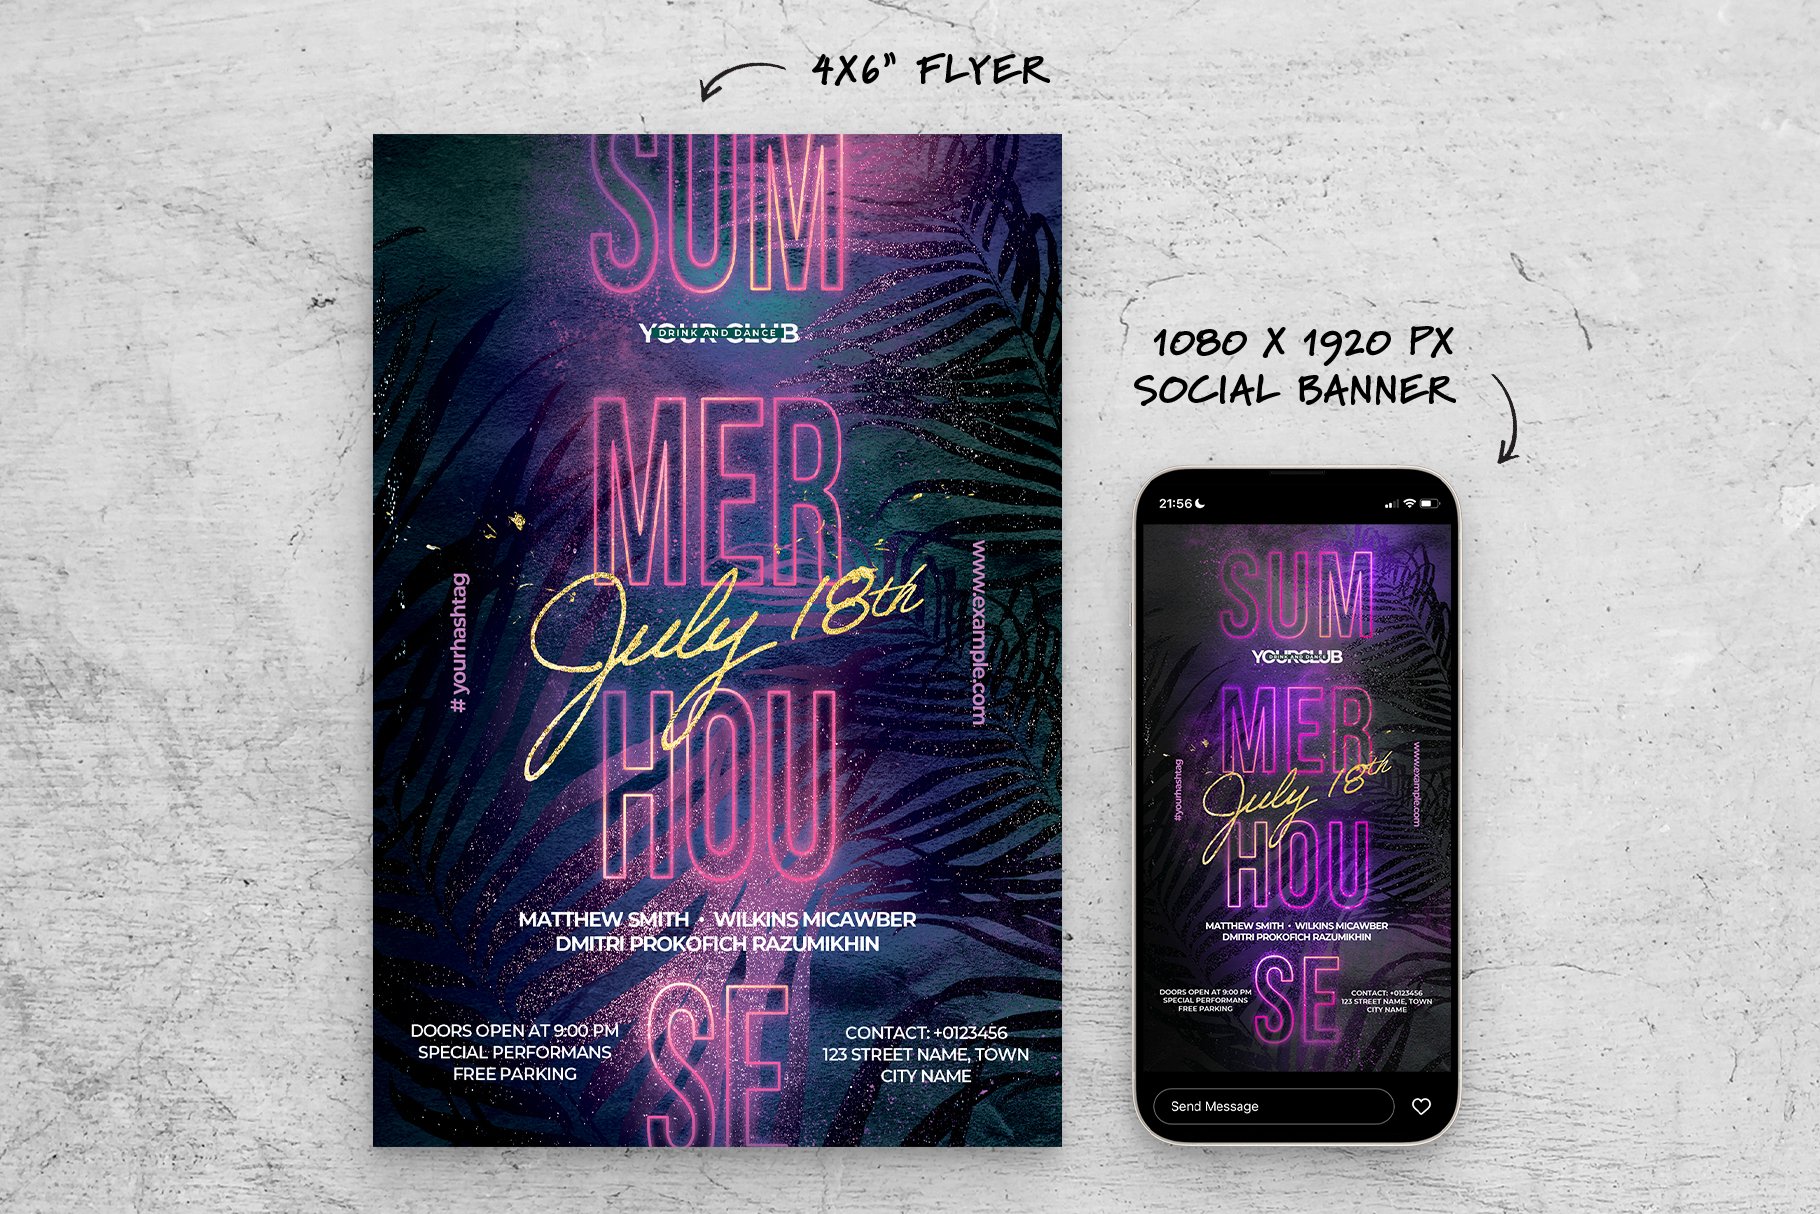 Summer House DJ Flyer + Banners preview image.